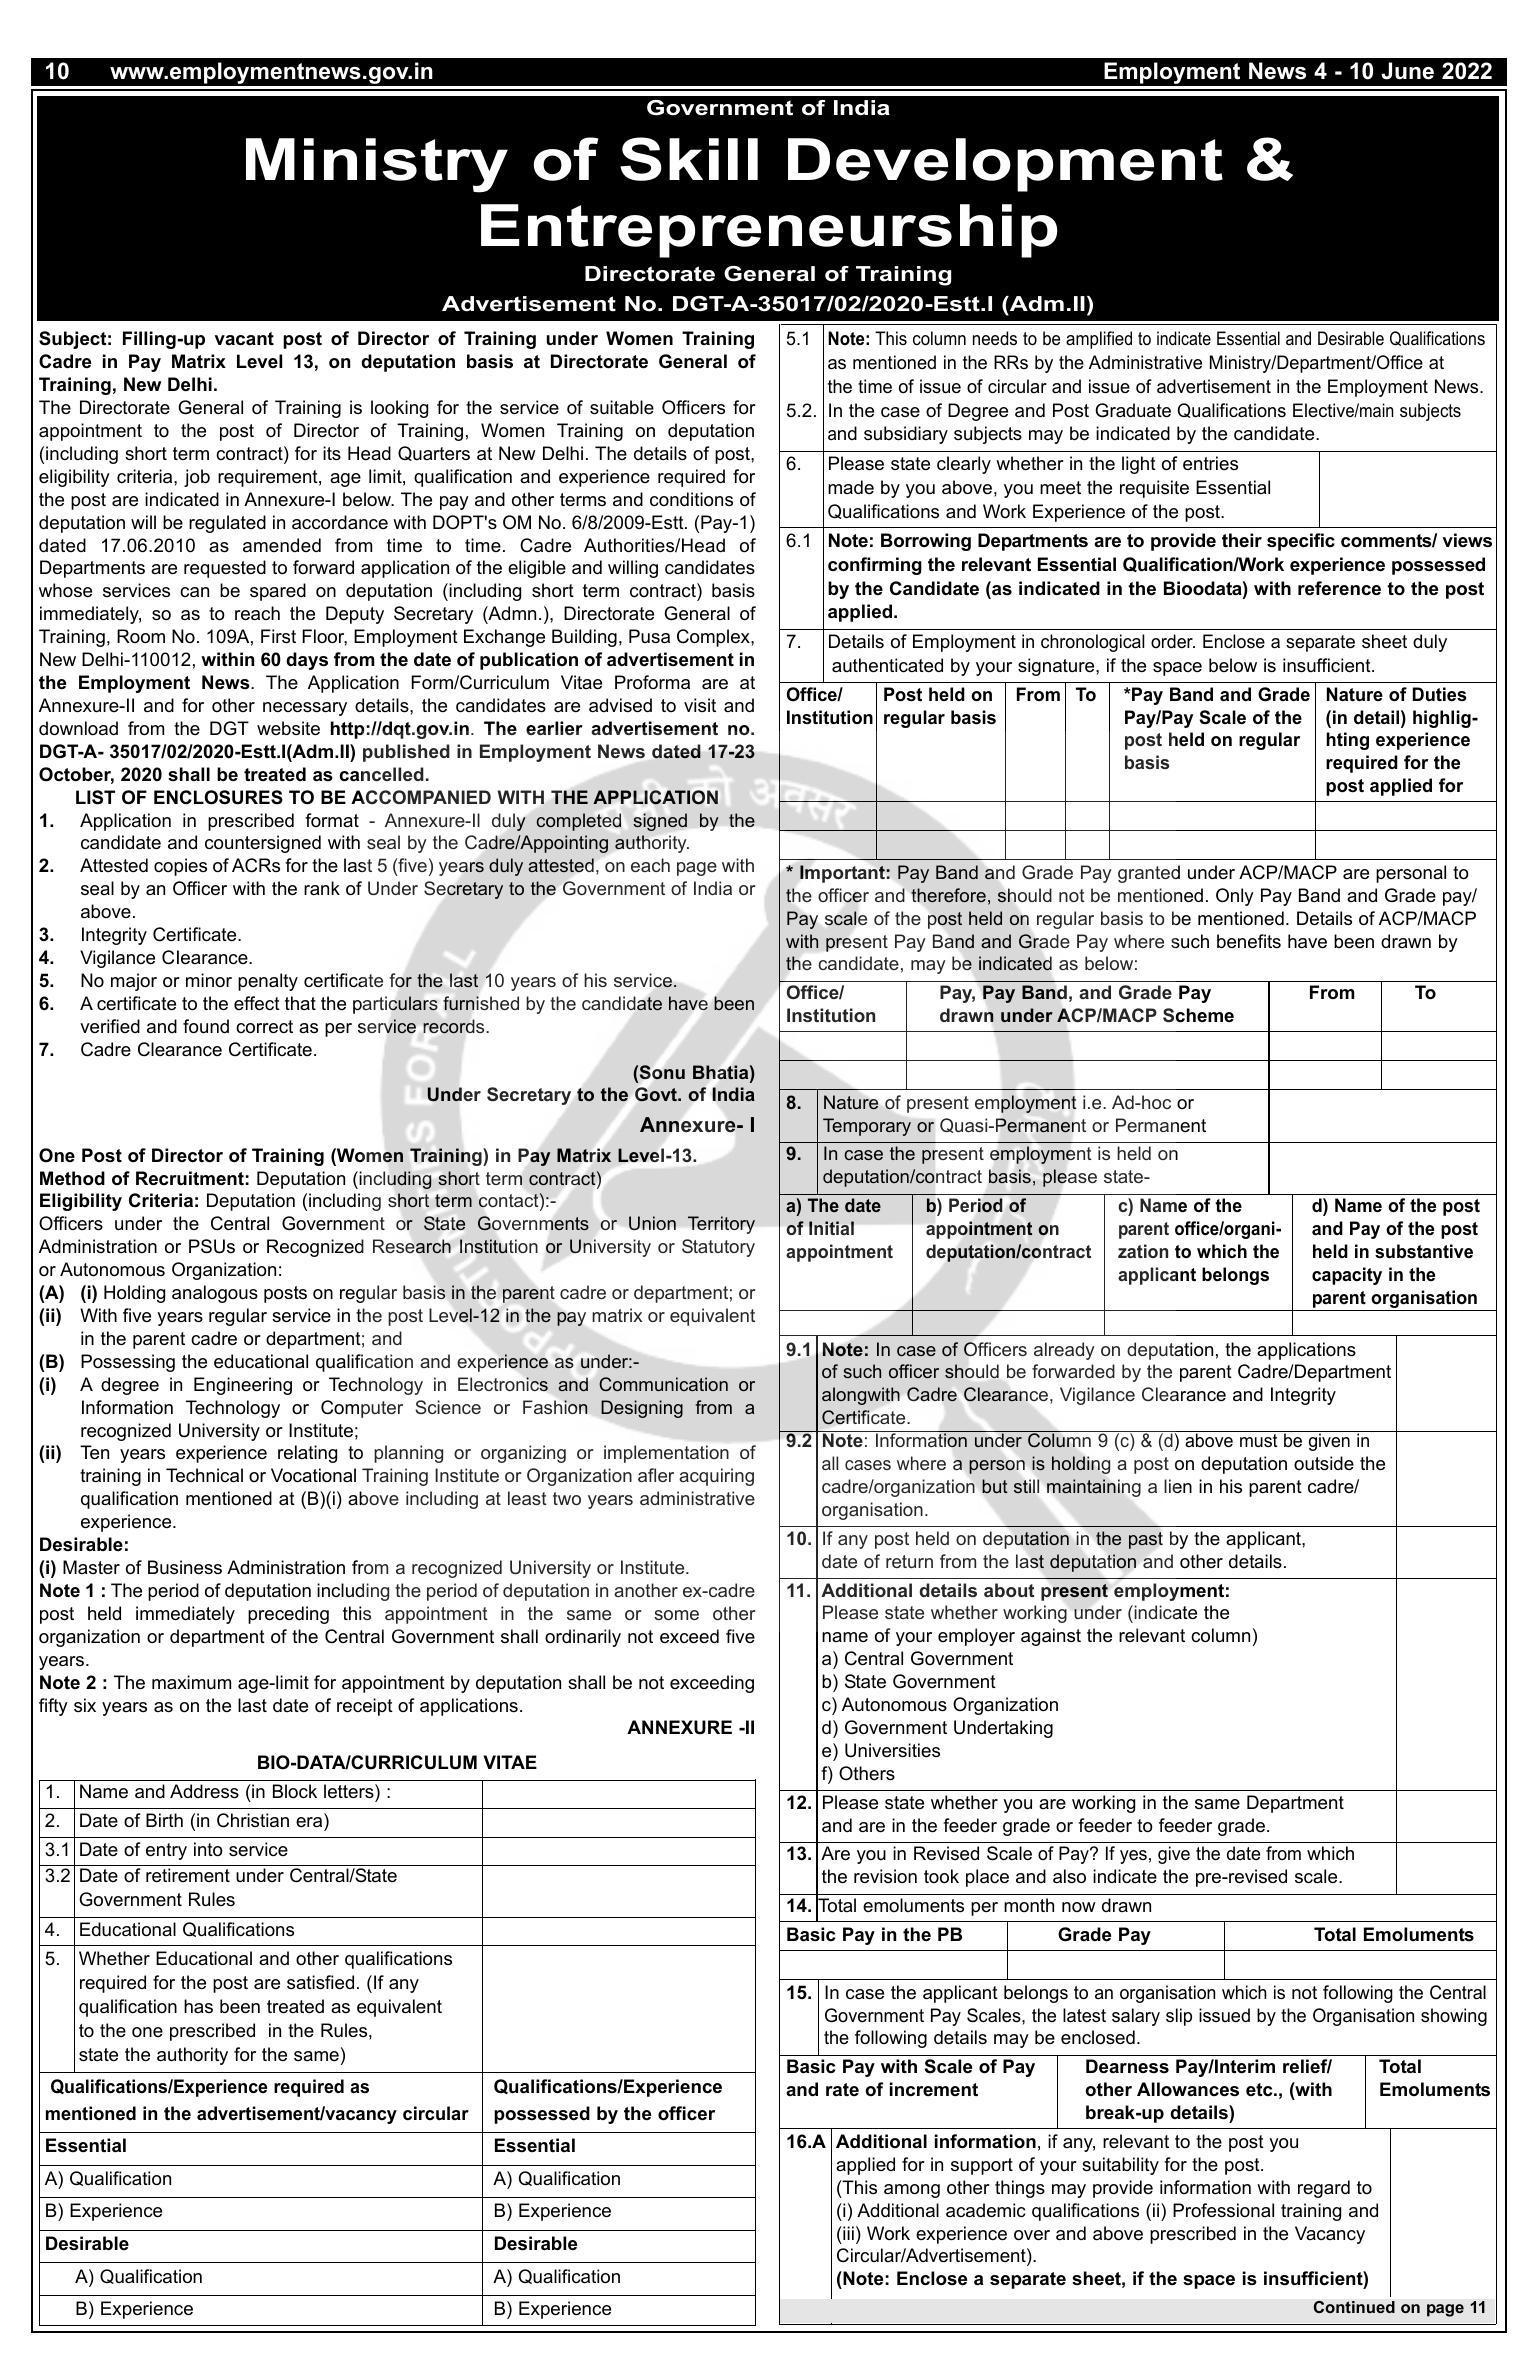 Directorate General of Training Director of Training Recruitment 2022 - Page 1